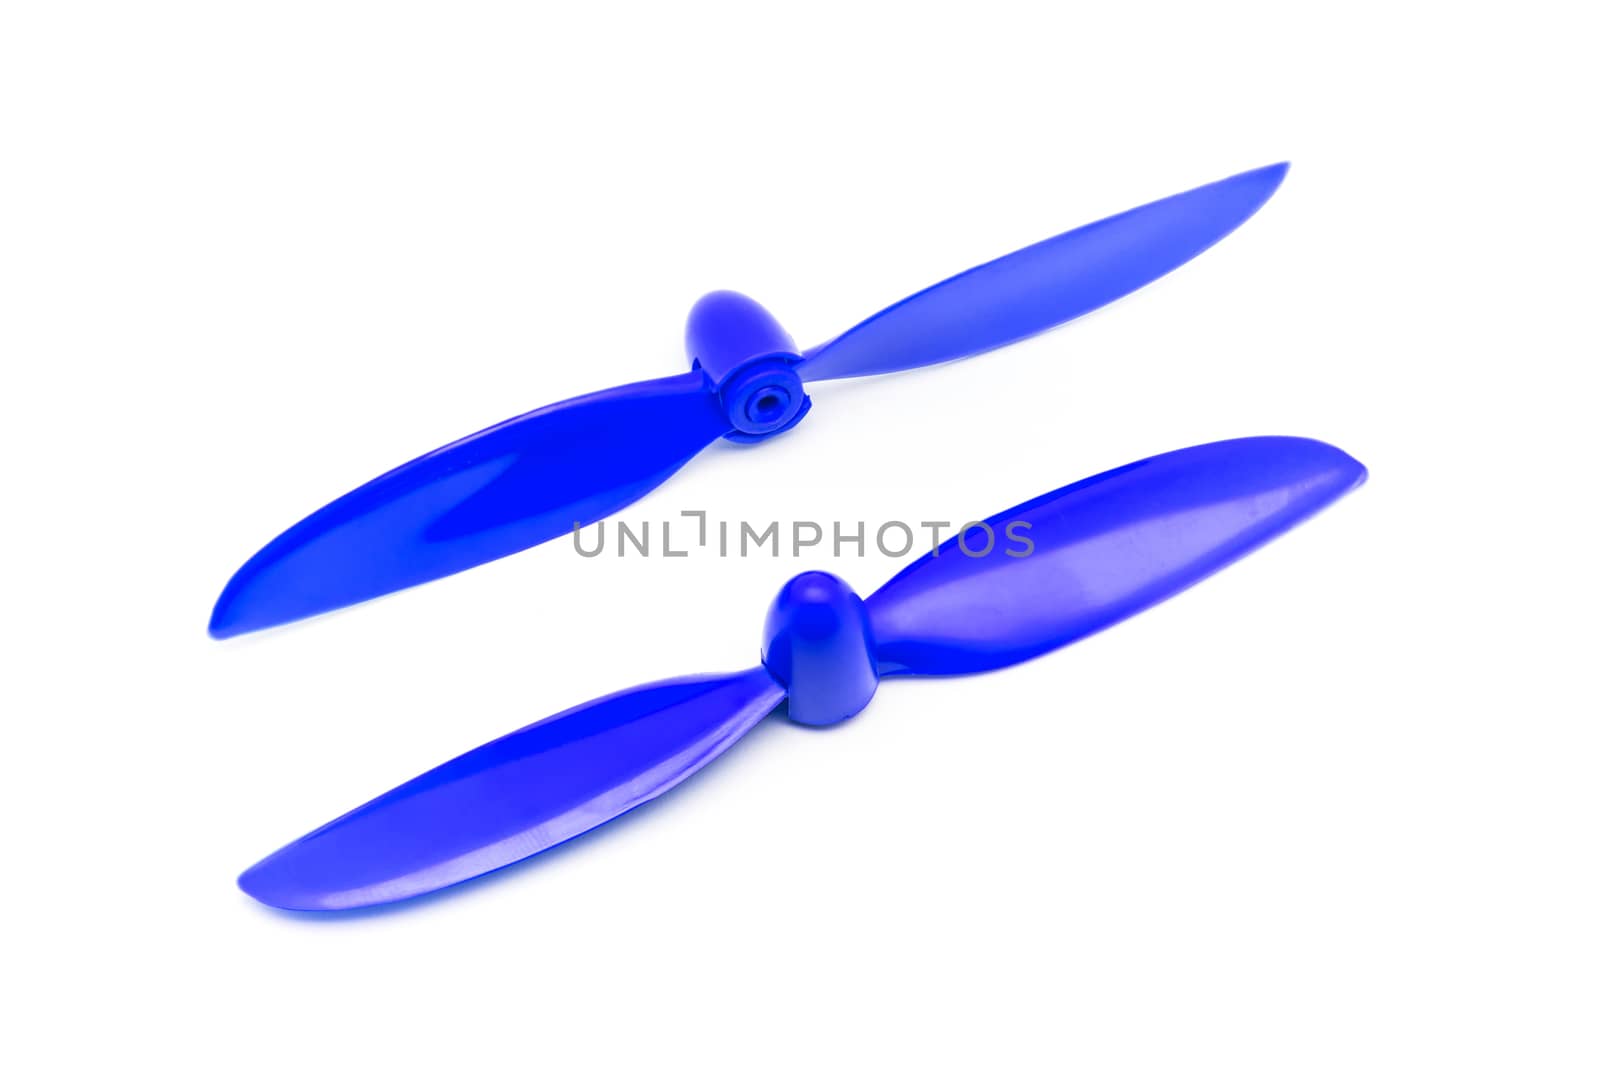 Pair of Blue Propellers for Radio Controlled Model Aircraft by noneam